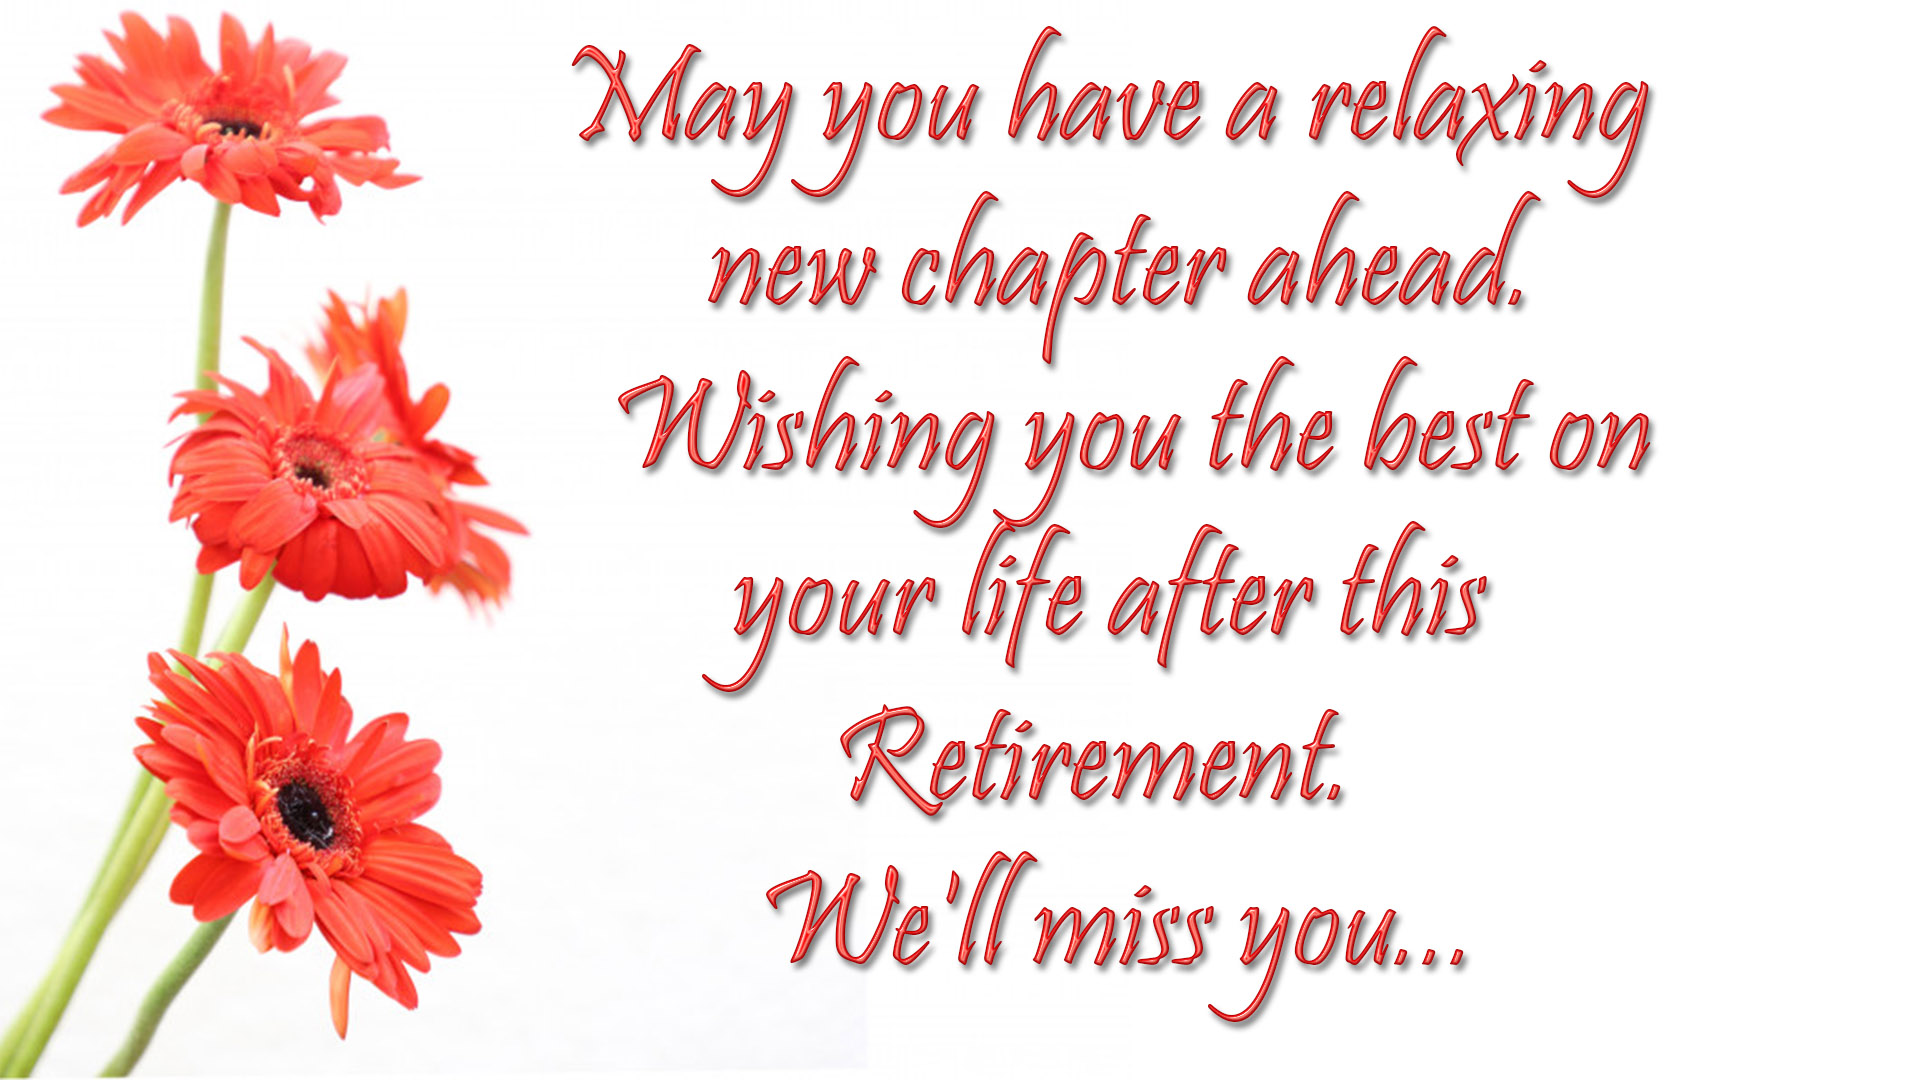 happy-retirement-wishes-quotes-amp-messages-images-gambaran